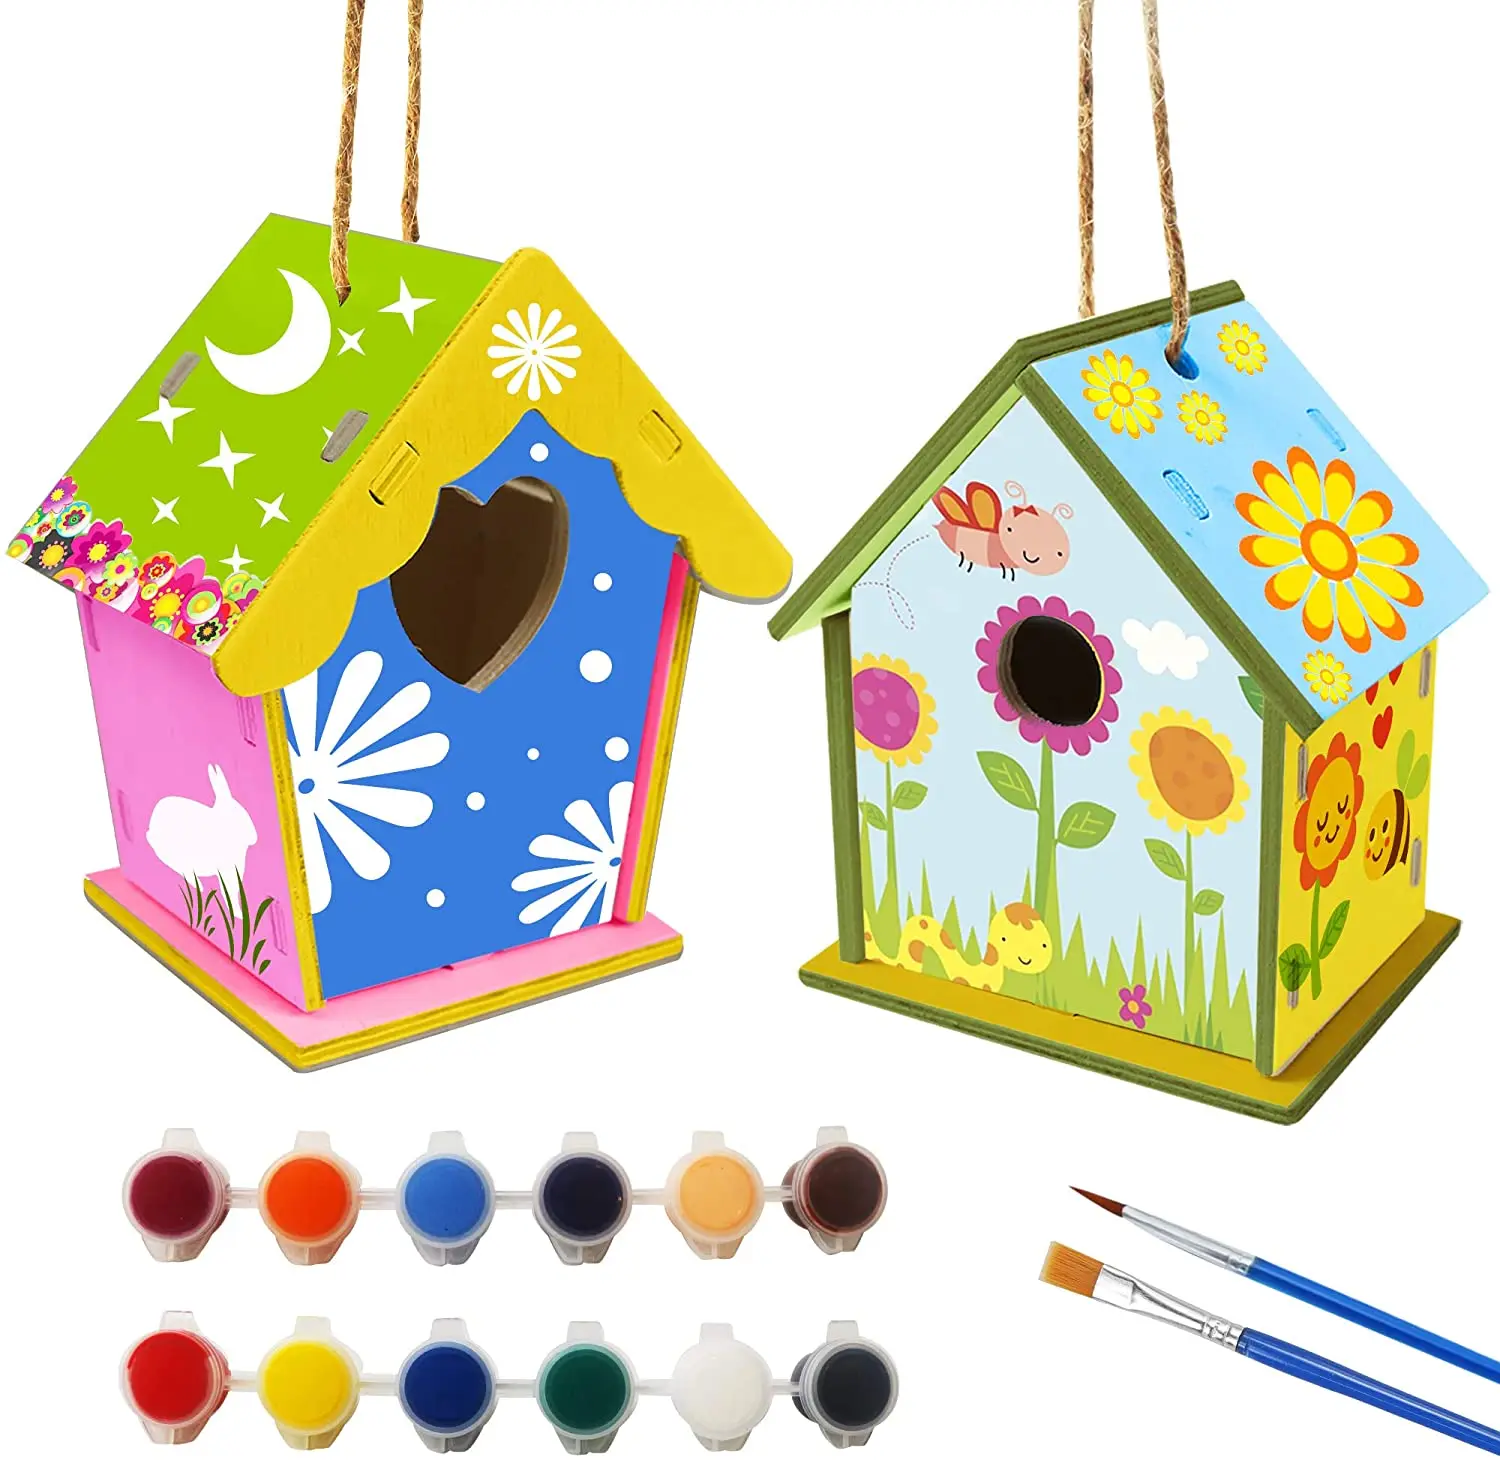 caiyuanggUS  Crafts for Kids 2 Pack DIY Bird House Kit Birdhouse to Paint and Decorate for Kids Arts and Crafts Wooden Arts for Girls Boys Toddlers 